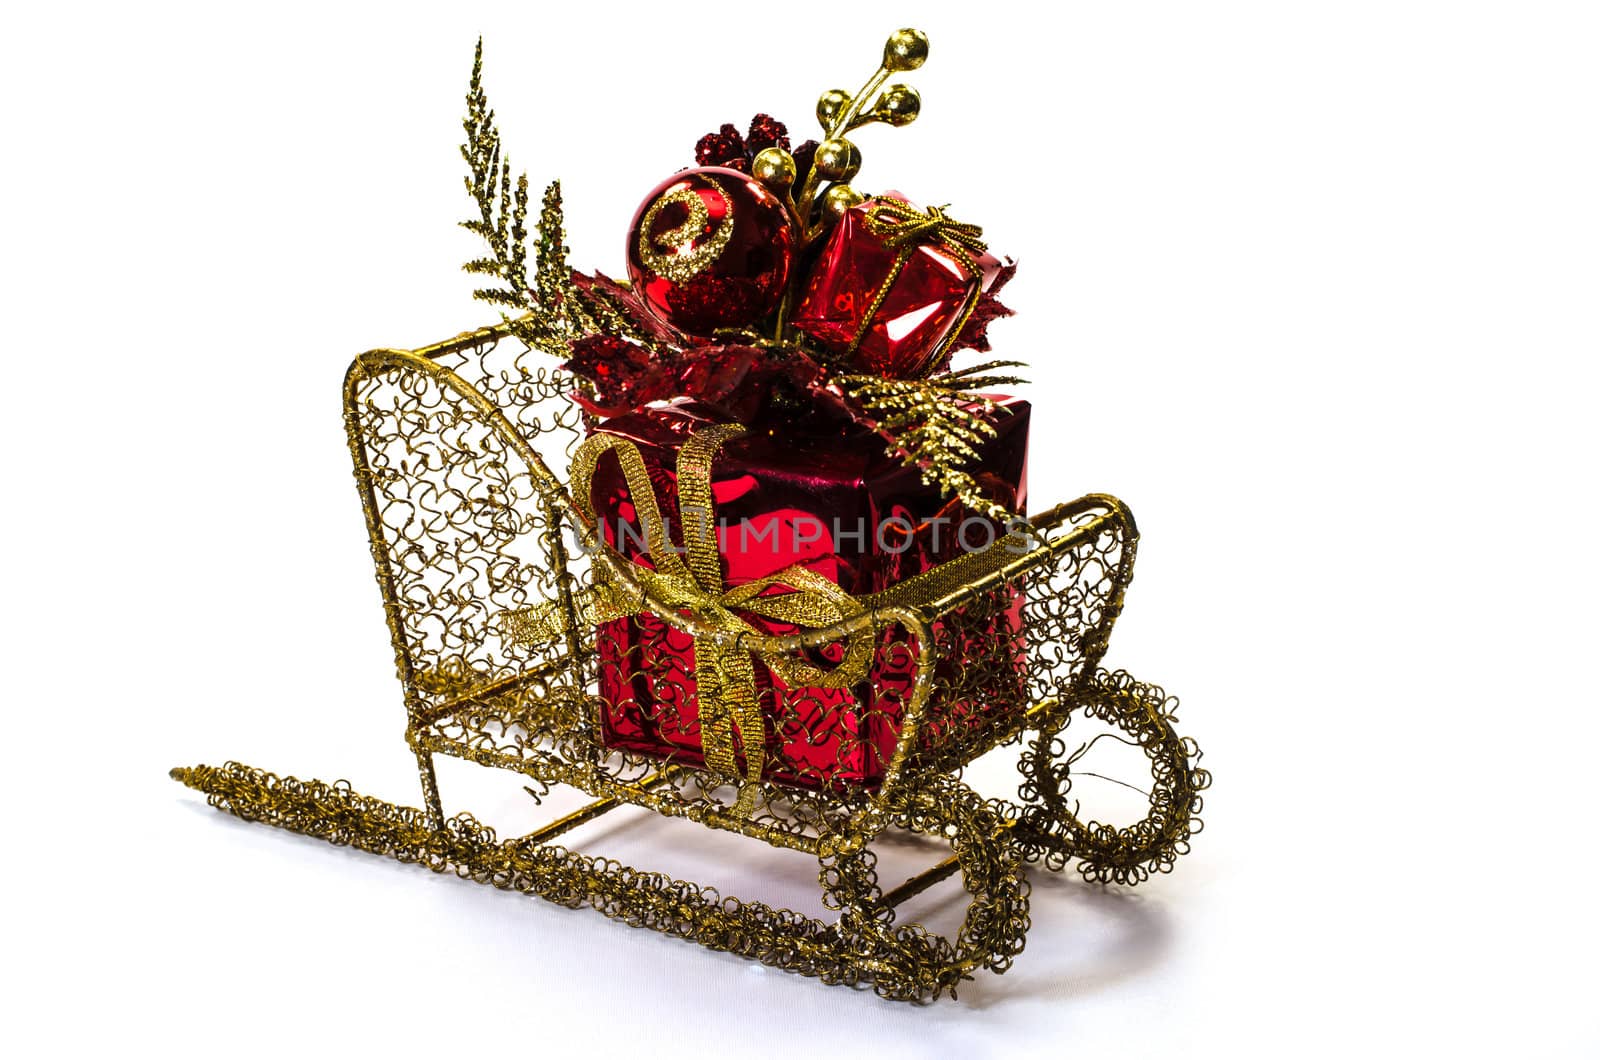 Christmas gift on sleigh isolated on white background.